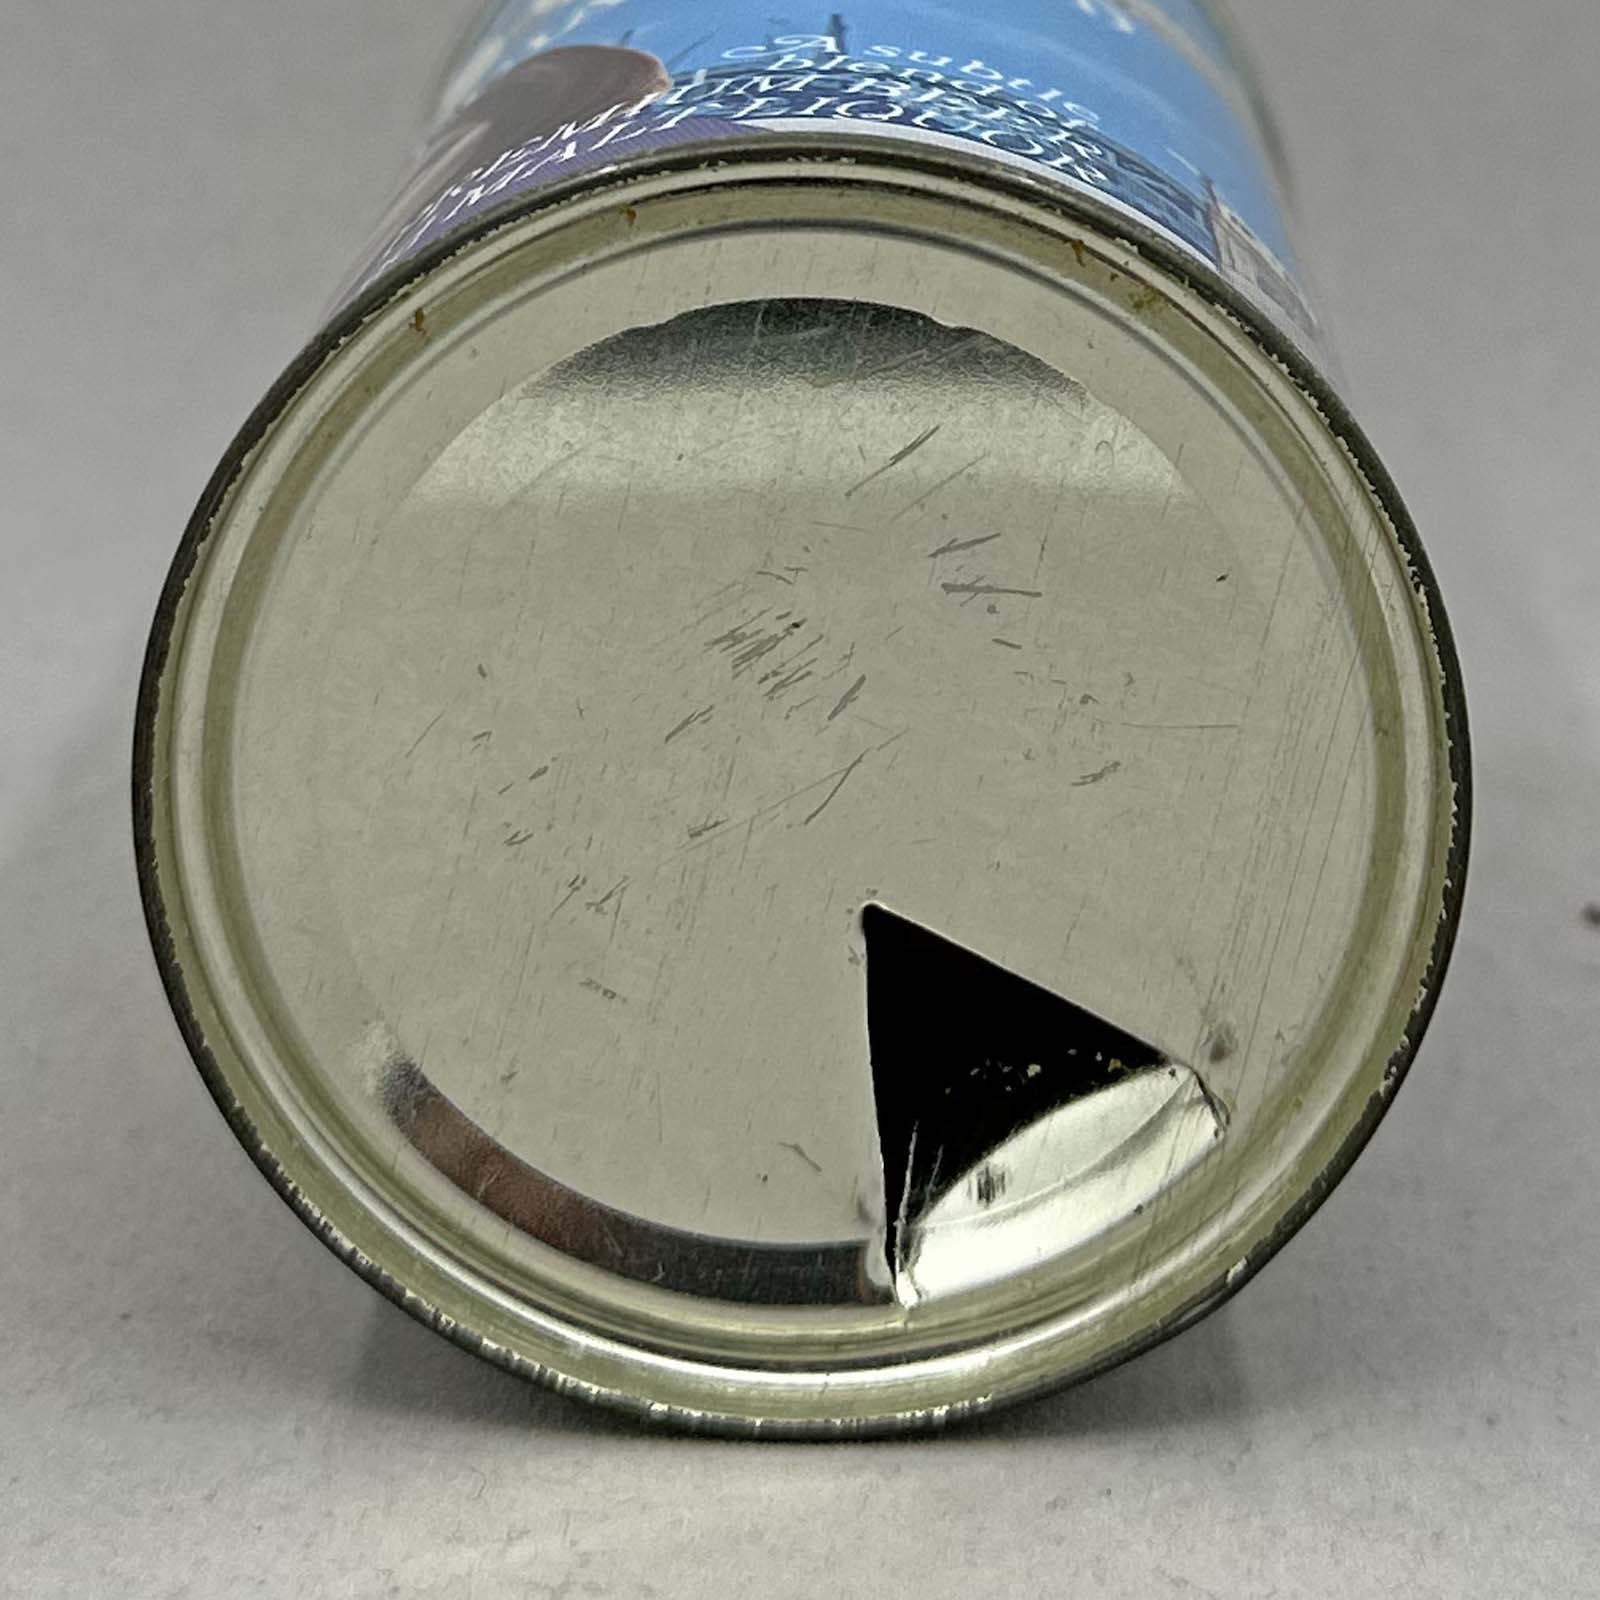 007 82-31 pull tab beer can 6